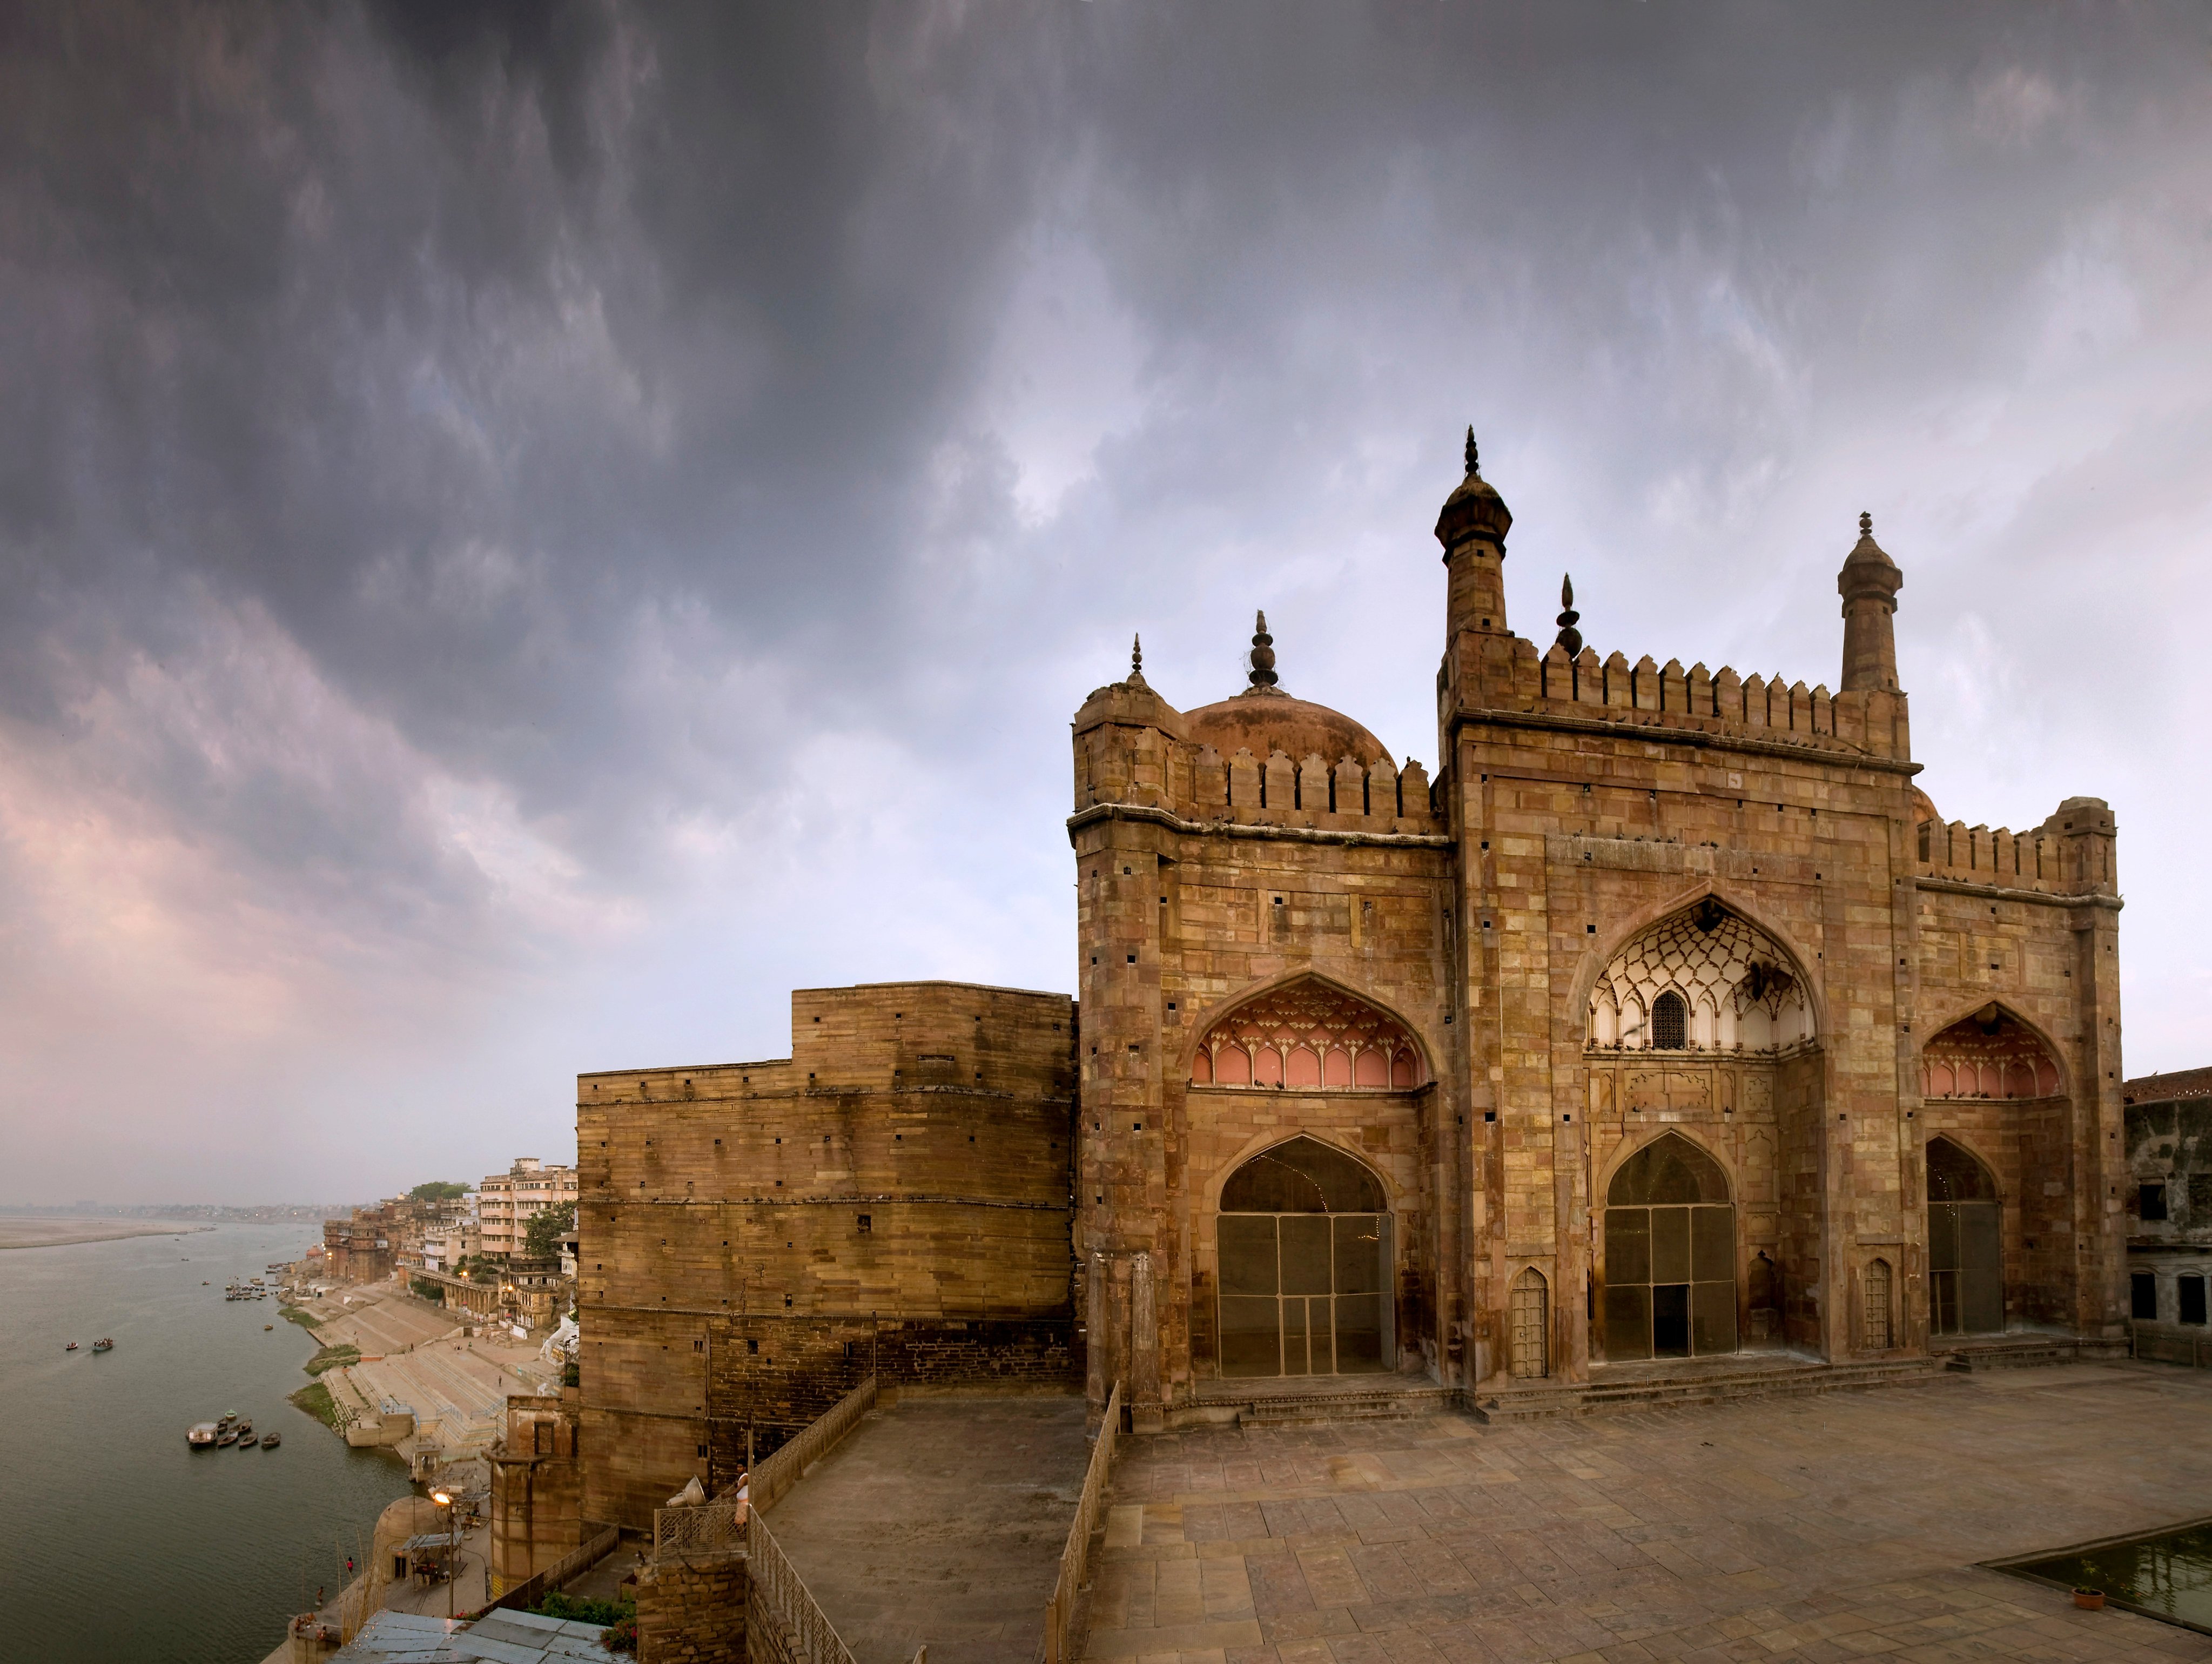 The Alamgir Mosque in Varanasi, one of thousands of monuments in India. Photo: Amit Pasricha/India Lost & Found